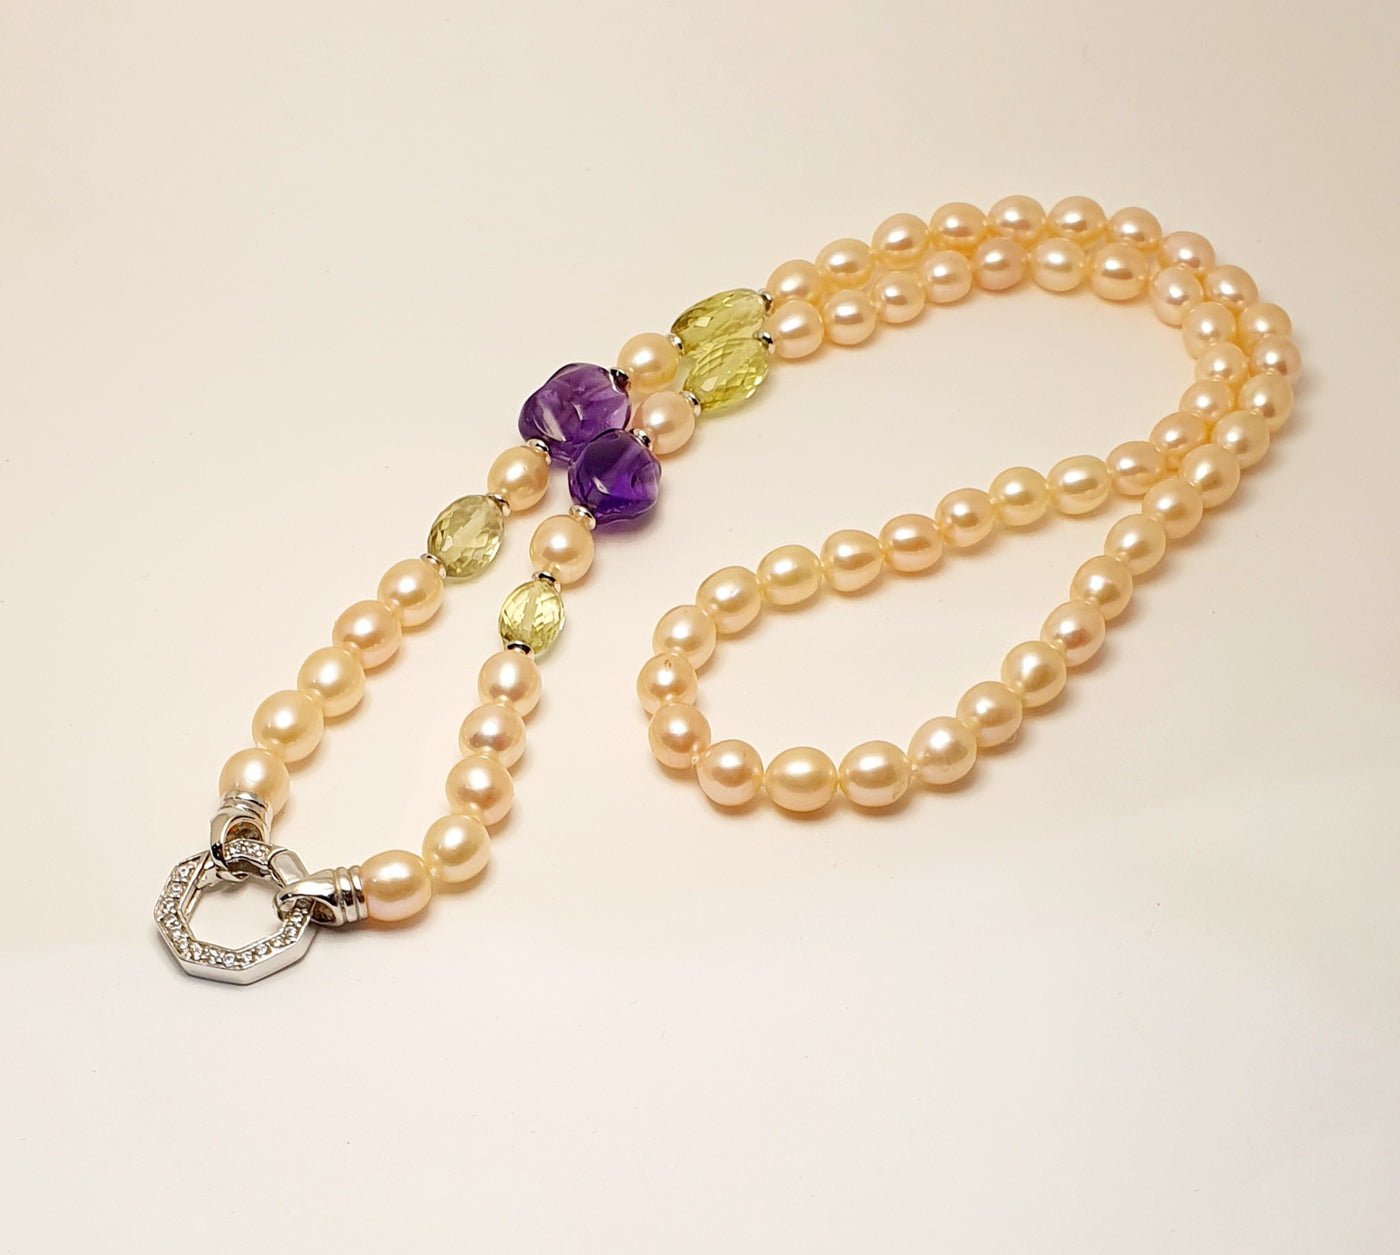 Strand Of Peach Freshwater Pearls With Amethyst And Lime Quartz